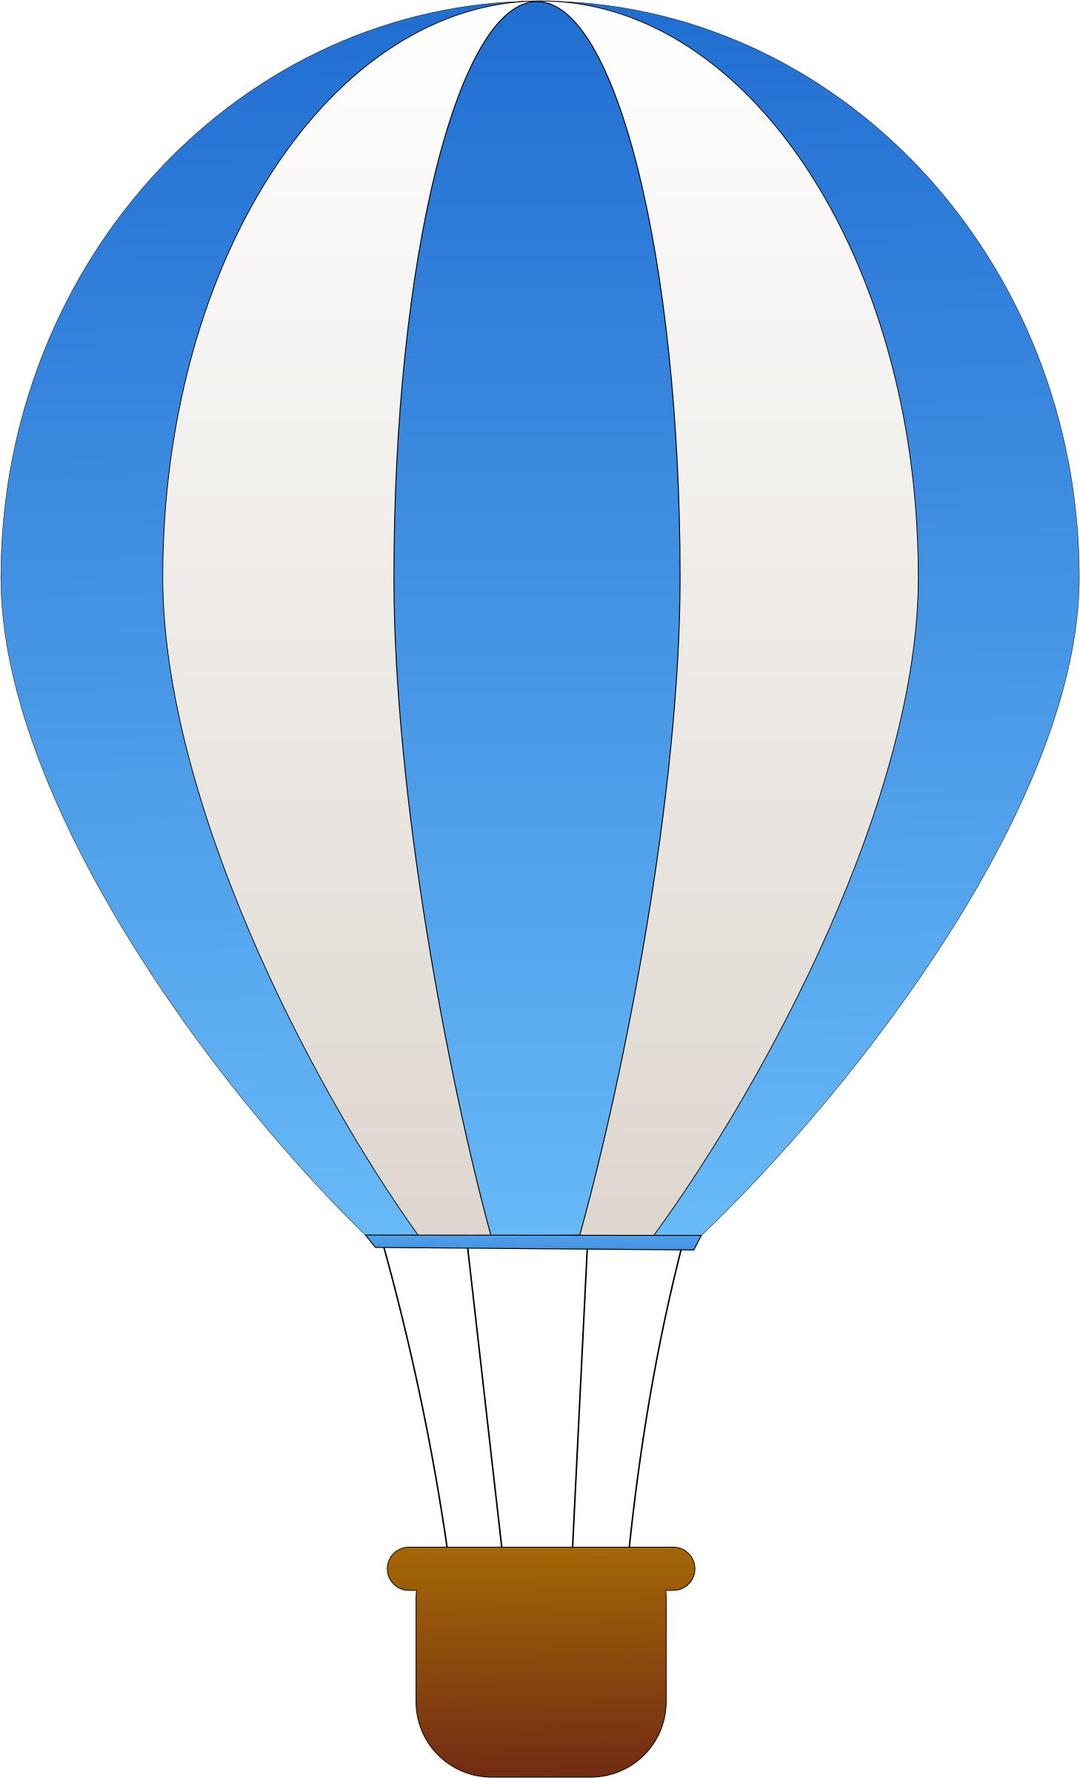 Vertical Striped Hot Air Balloons png transparent